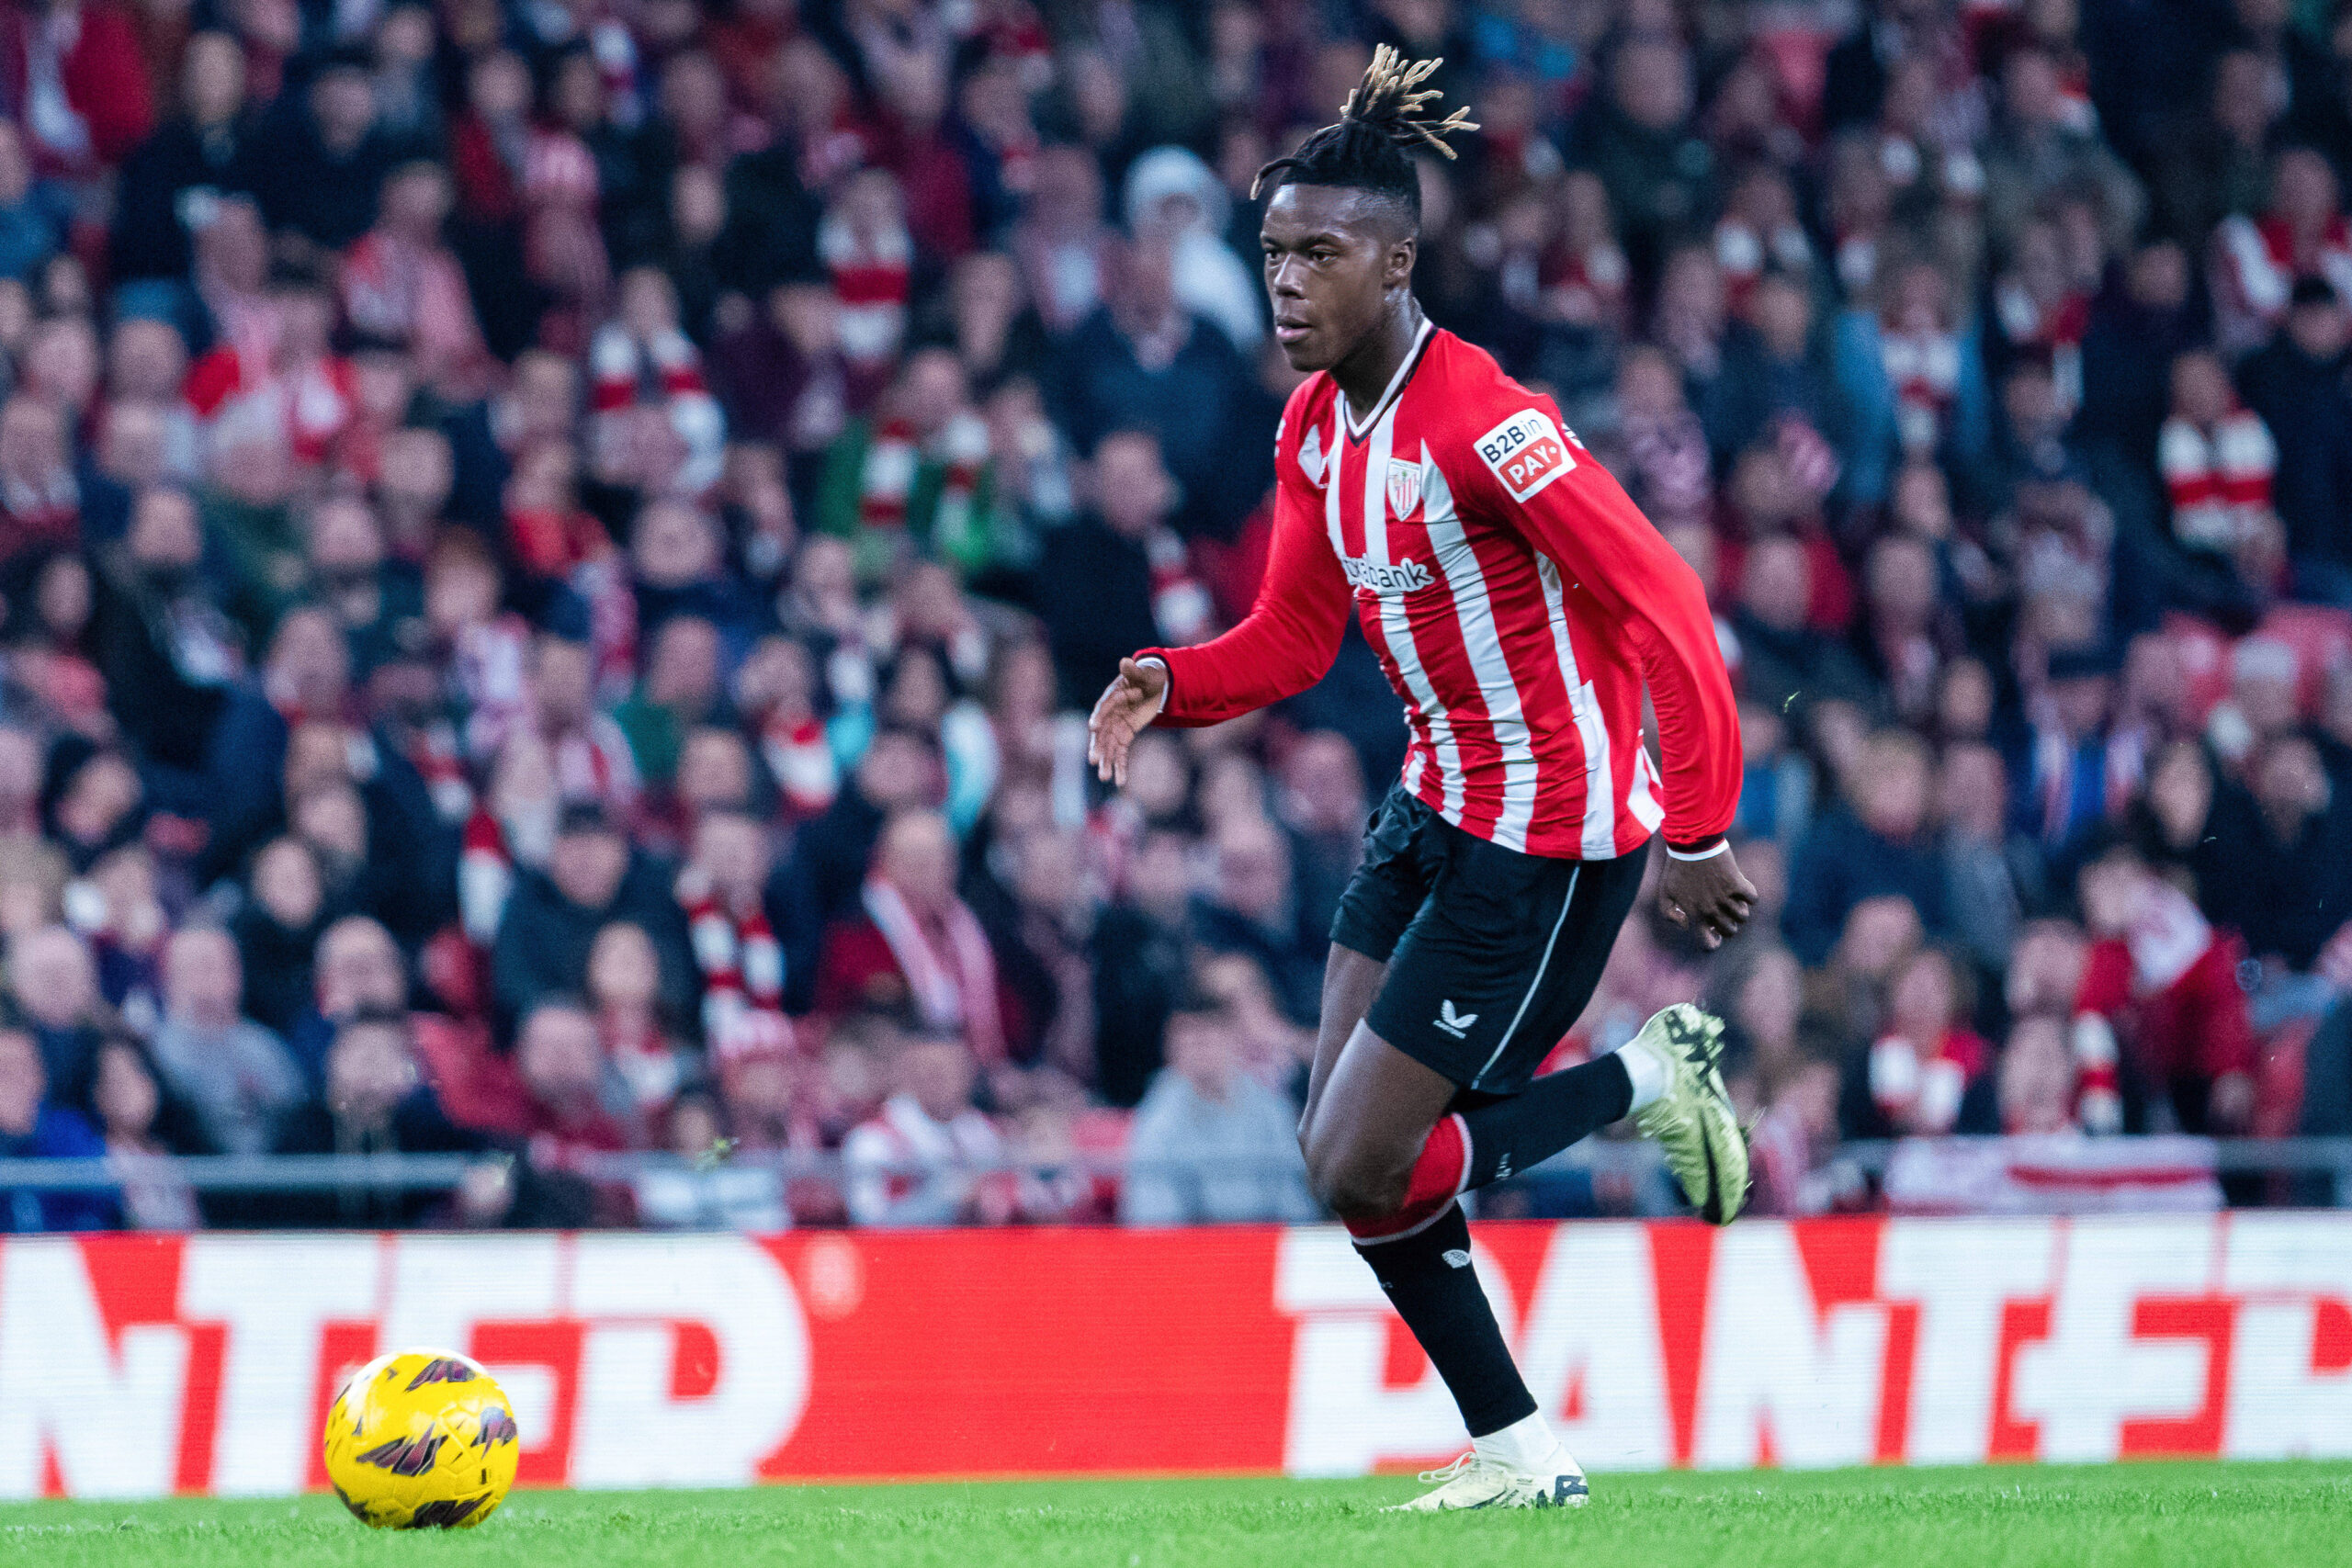 Spain international Nico Williams extends contract with Athletic Club - Get  Spanish Football News